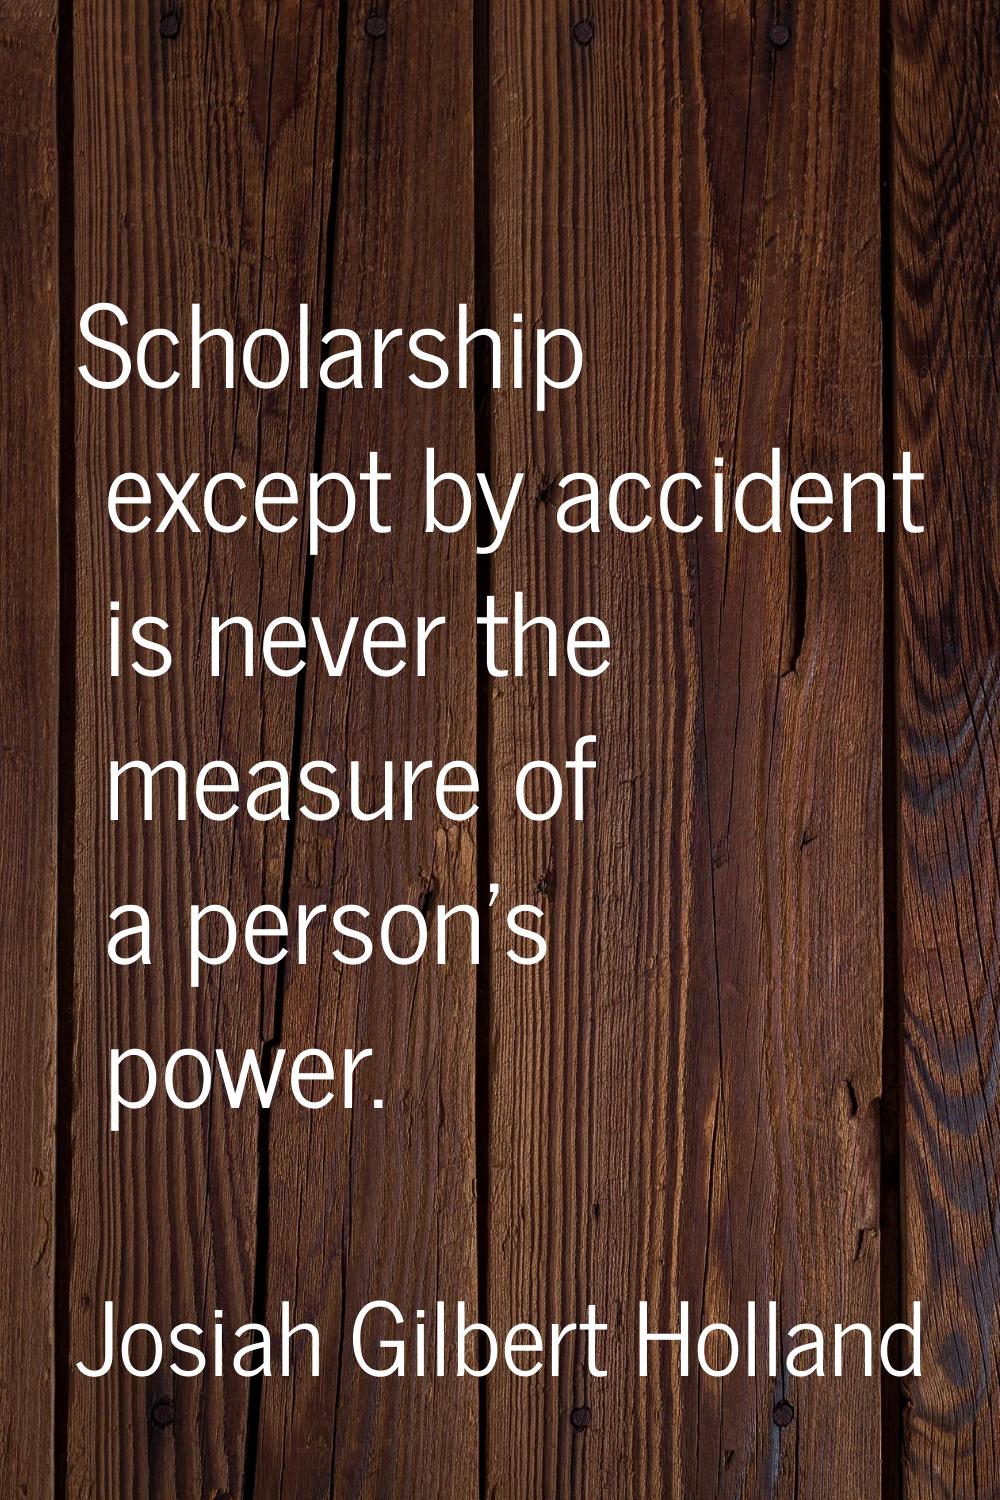 Scholarship except by accident is never the measure of a person's power.